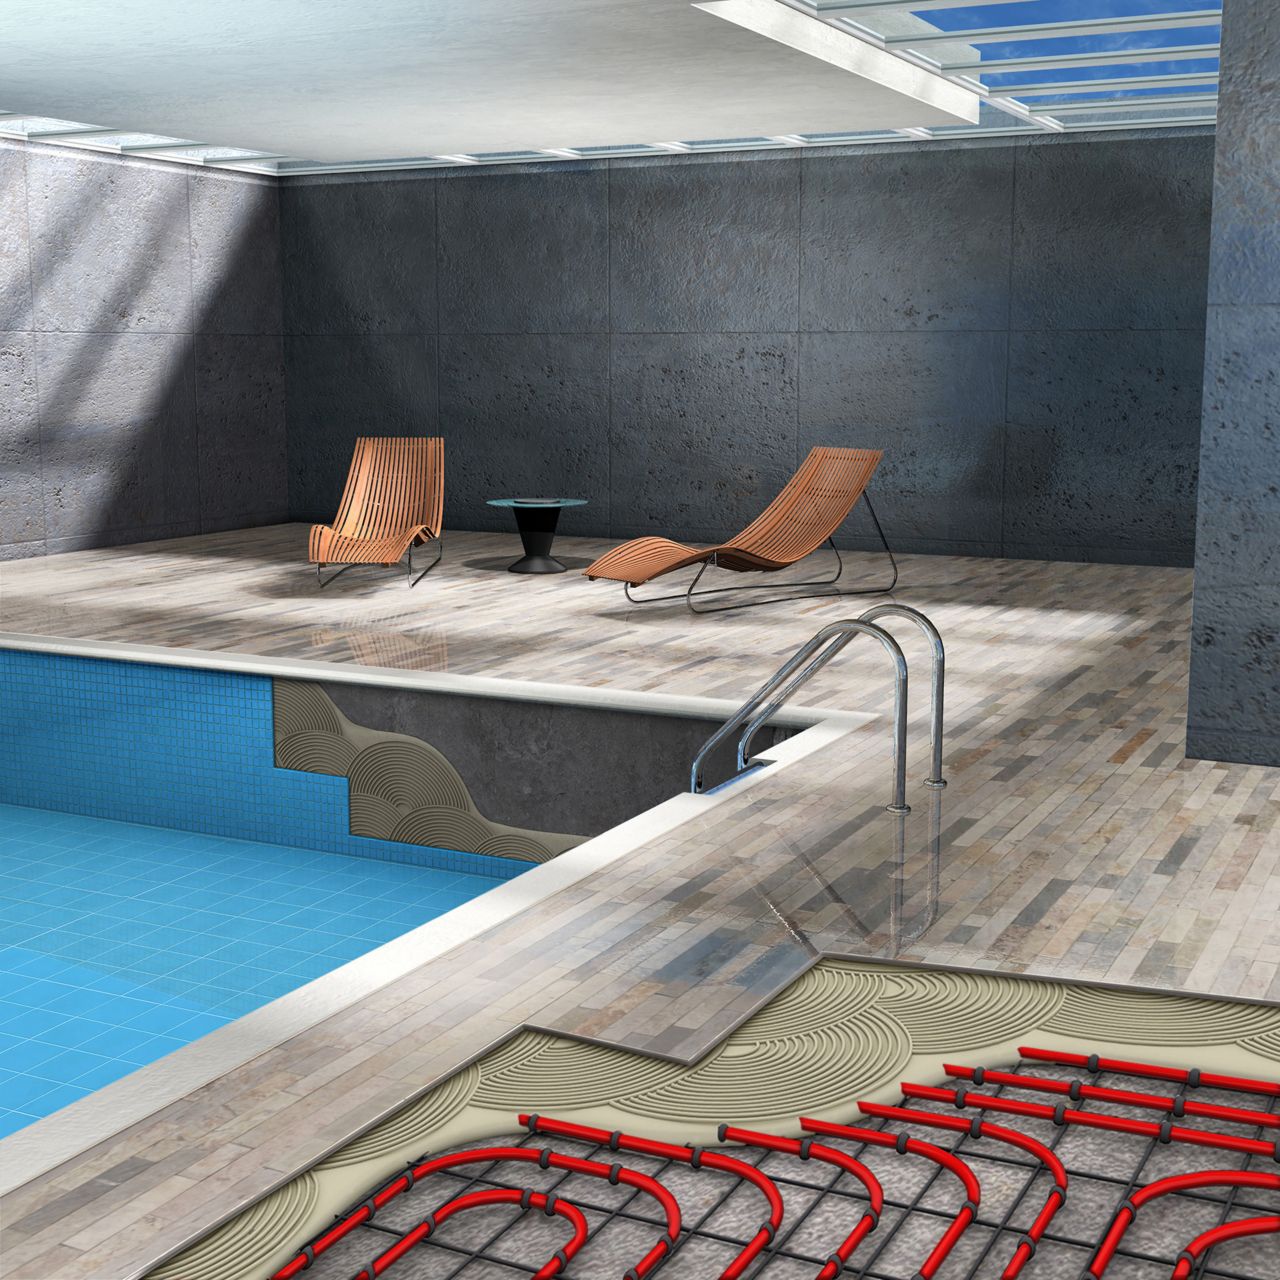 Illustration of pool area with SikaCeram 290 Starlight tile adhesive in heated floor